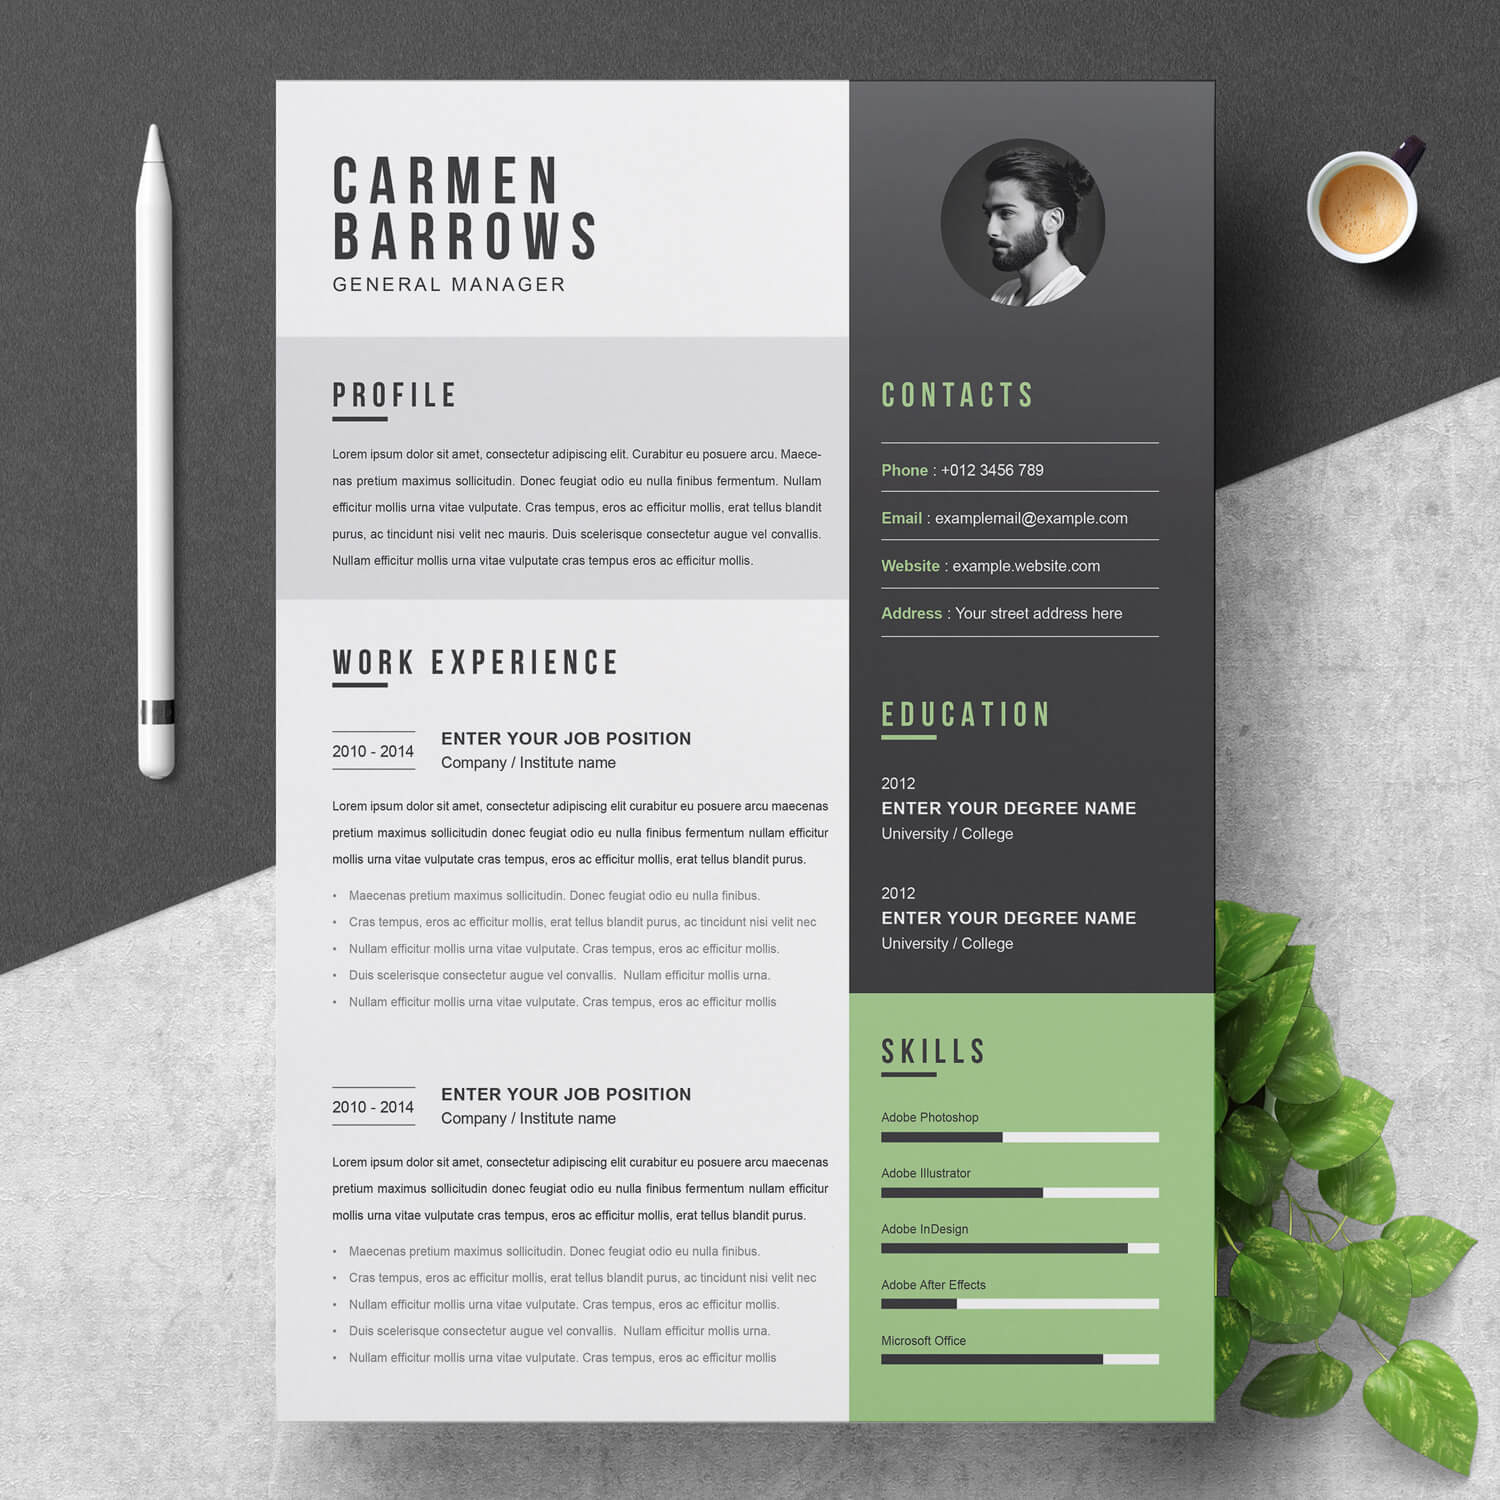 Adobe after Effects Resume Template Free Download Manager Resume Template 2021 – Resumeinventor